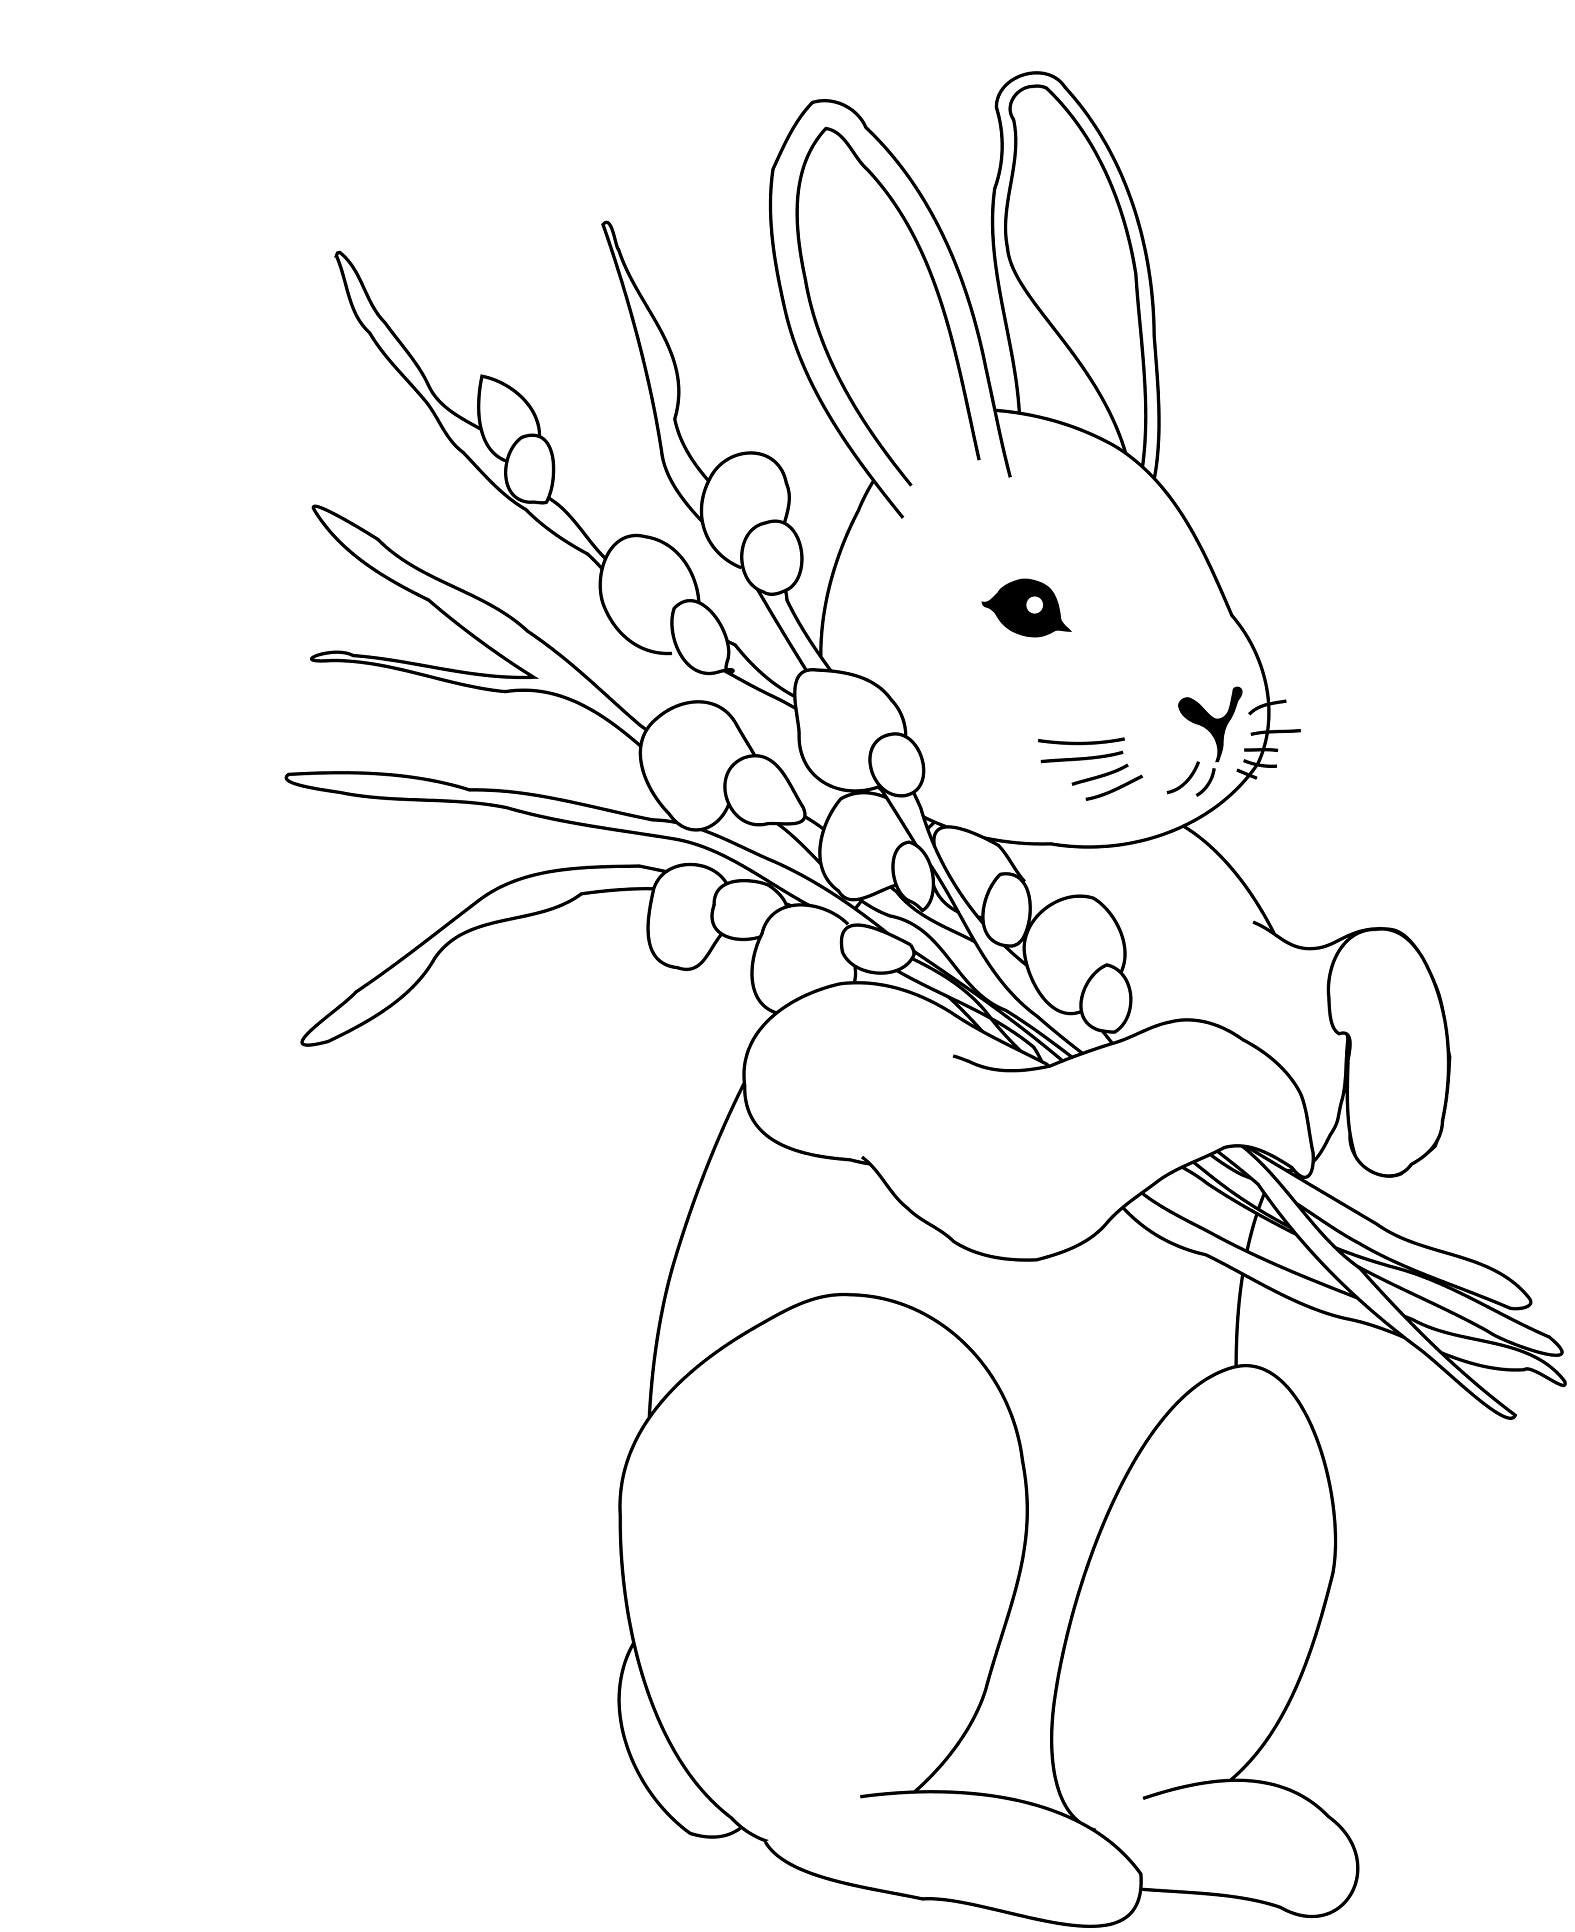 Printable Rabbit Coloring Pages – Animal Place